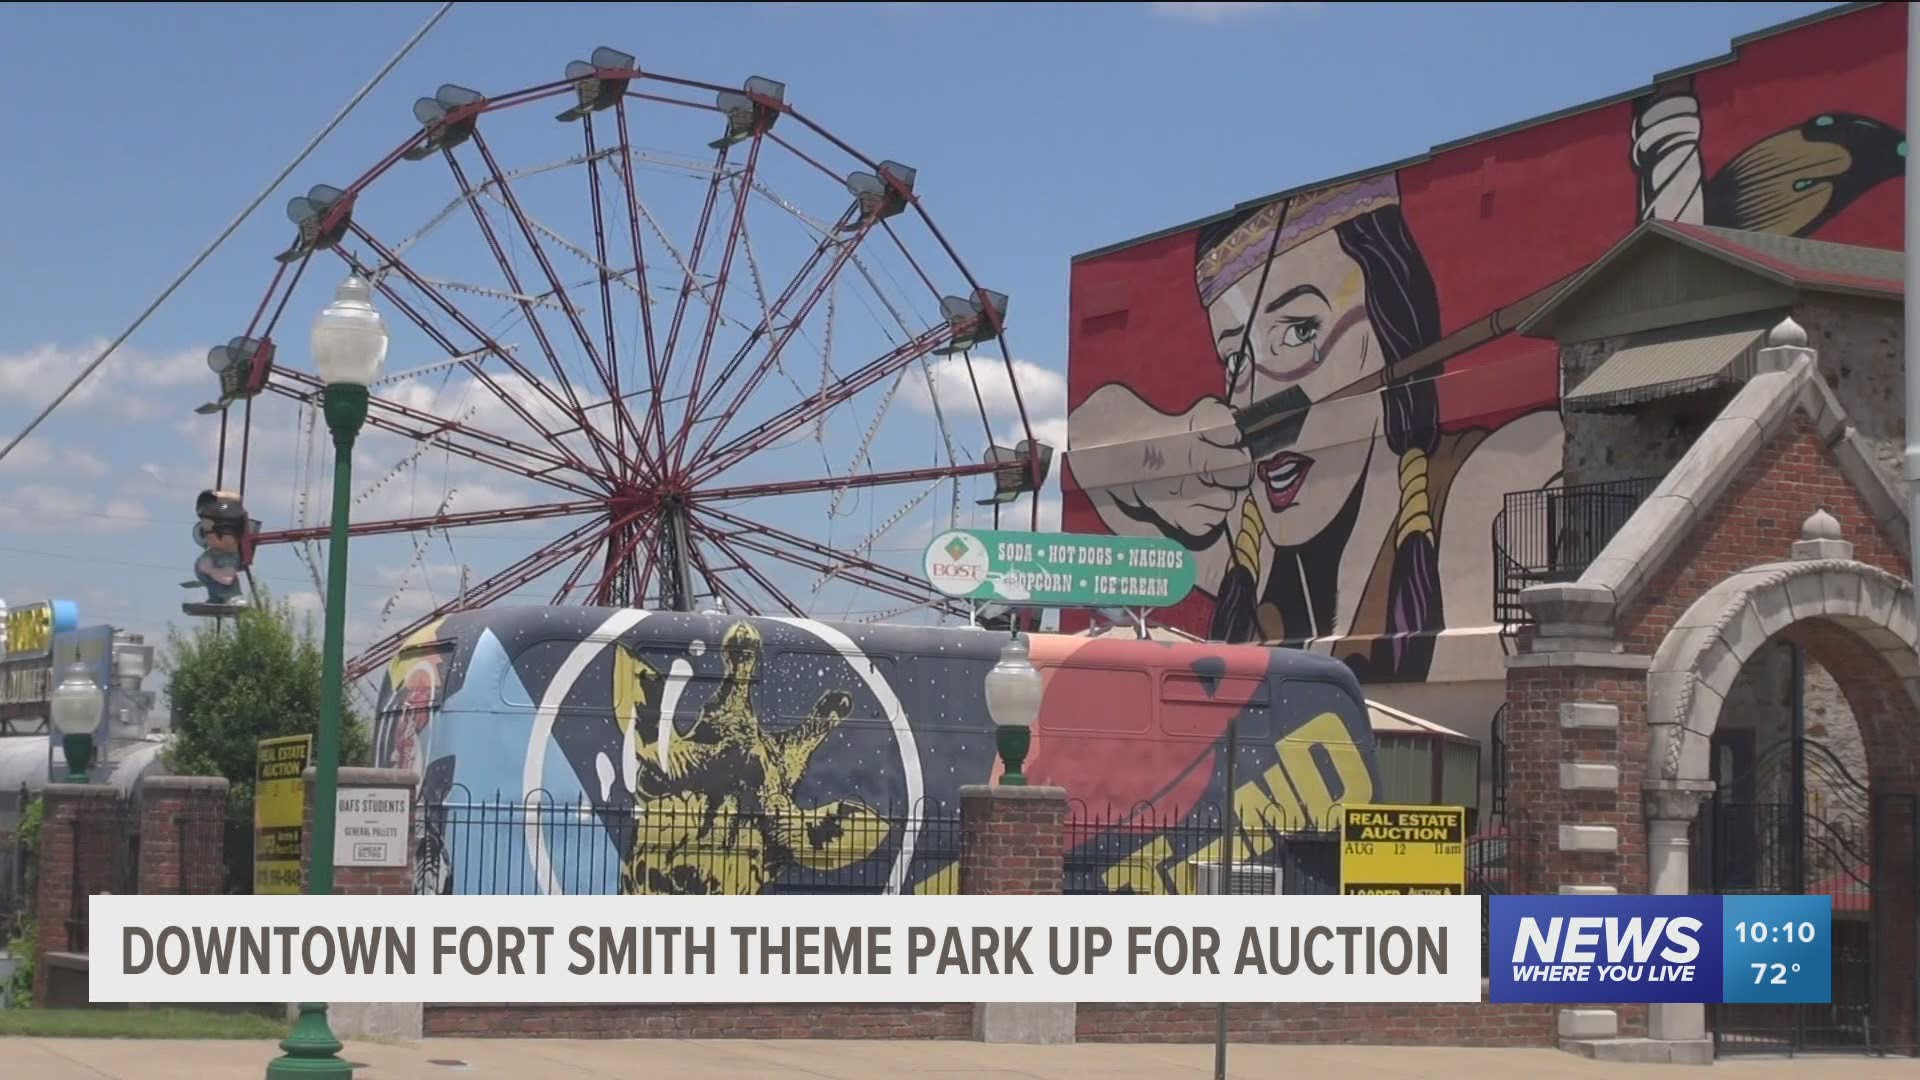 The Park at West End in Fort Smith is going up for auction on August 12th. The park is home to the Ferris Wheel, the Railcar Diner, and the Bertazzon carousel.